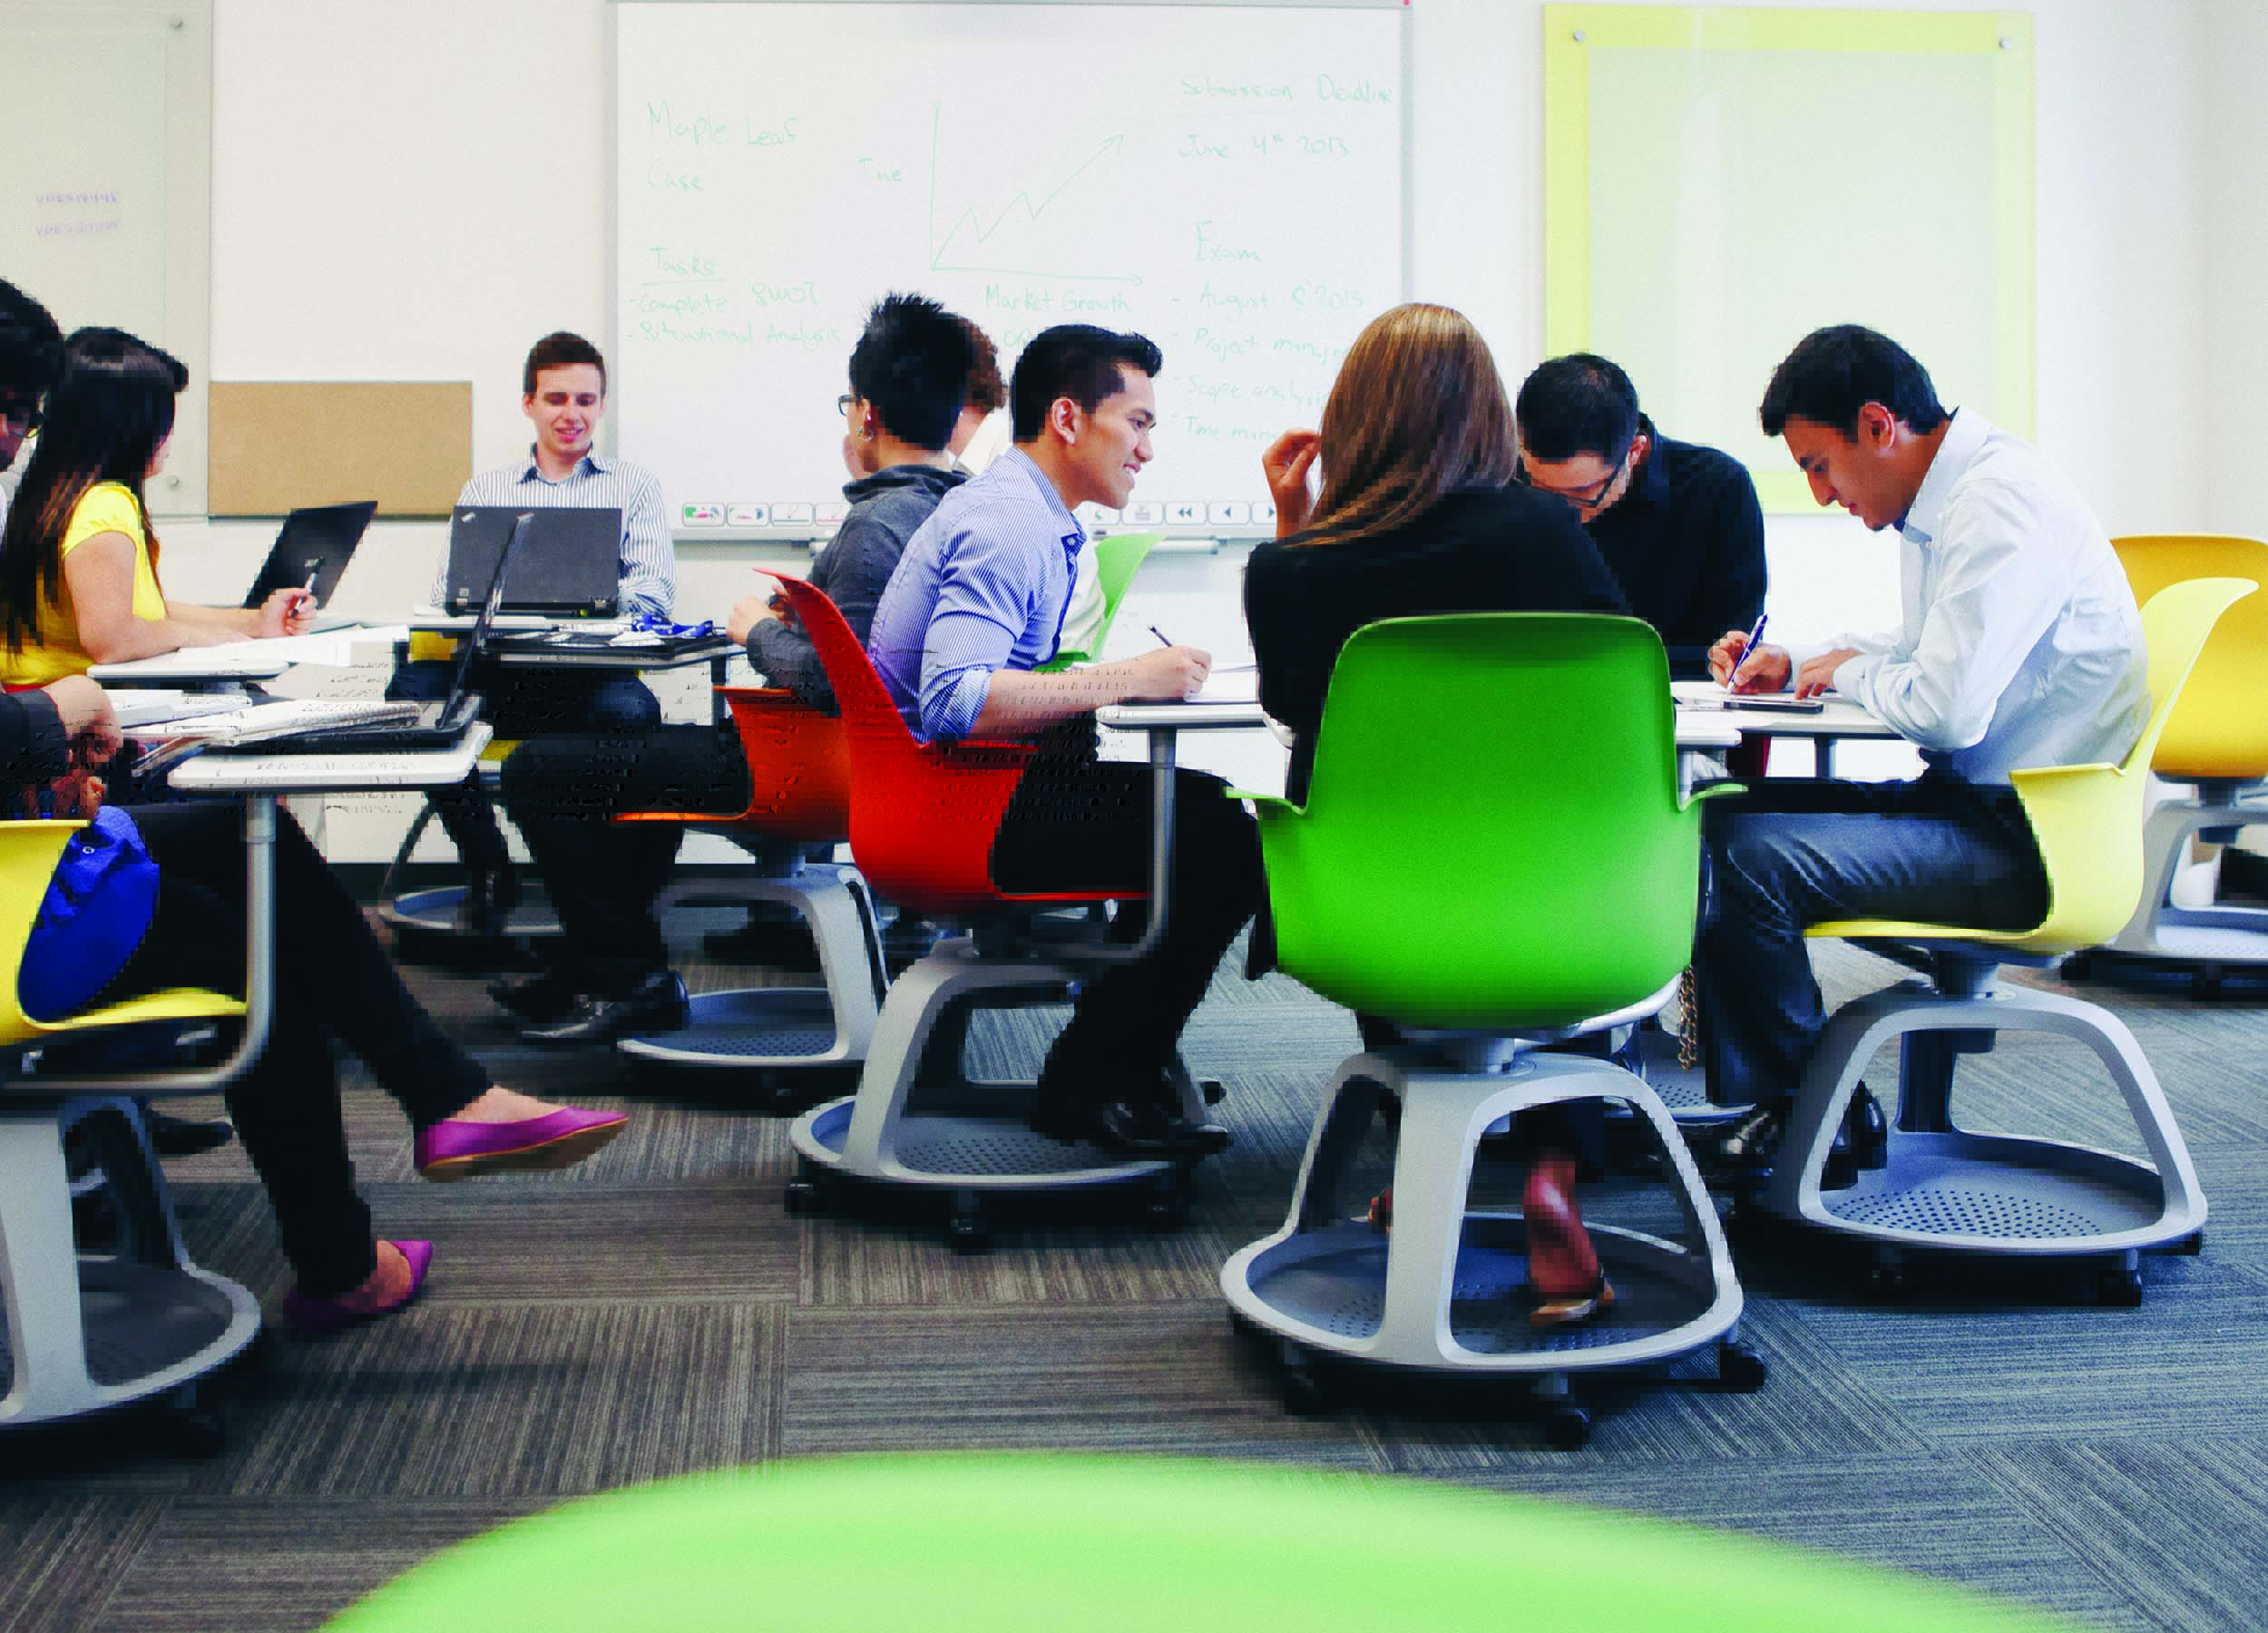 Students sitting in chairs around tables in a classroom